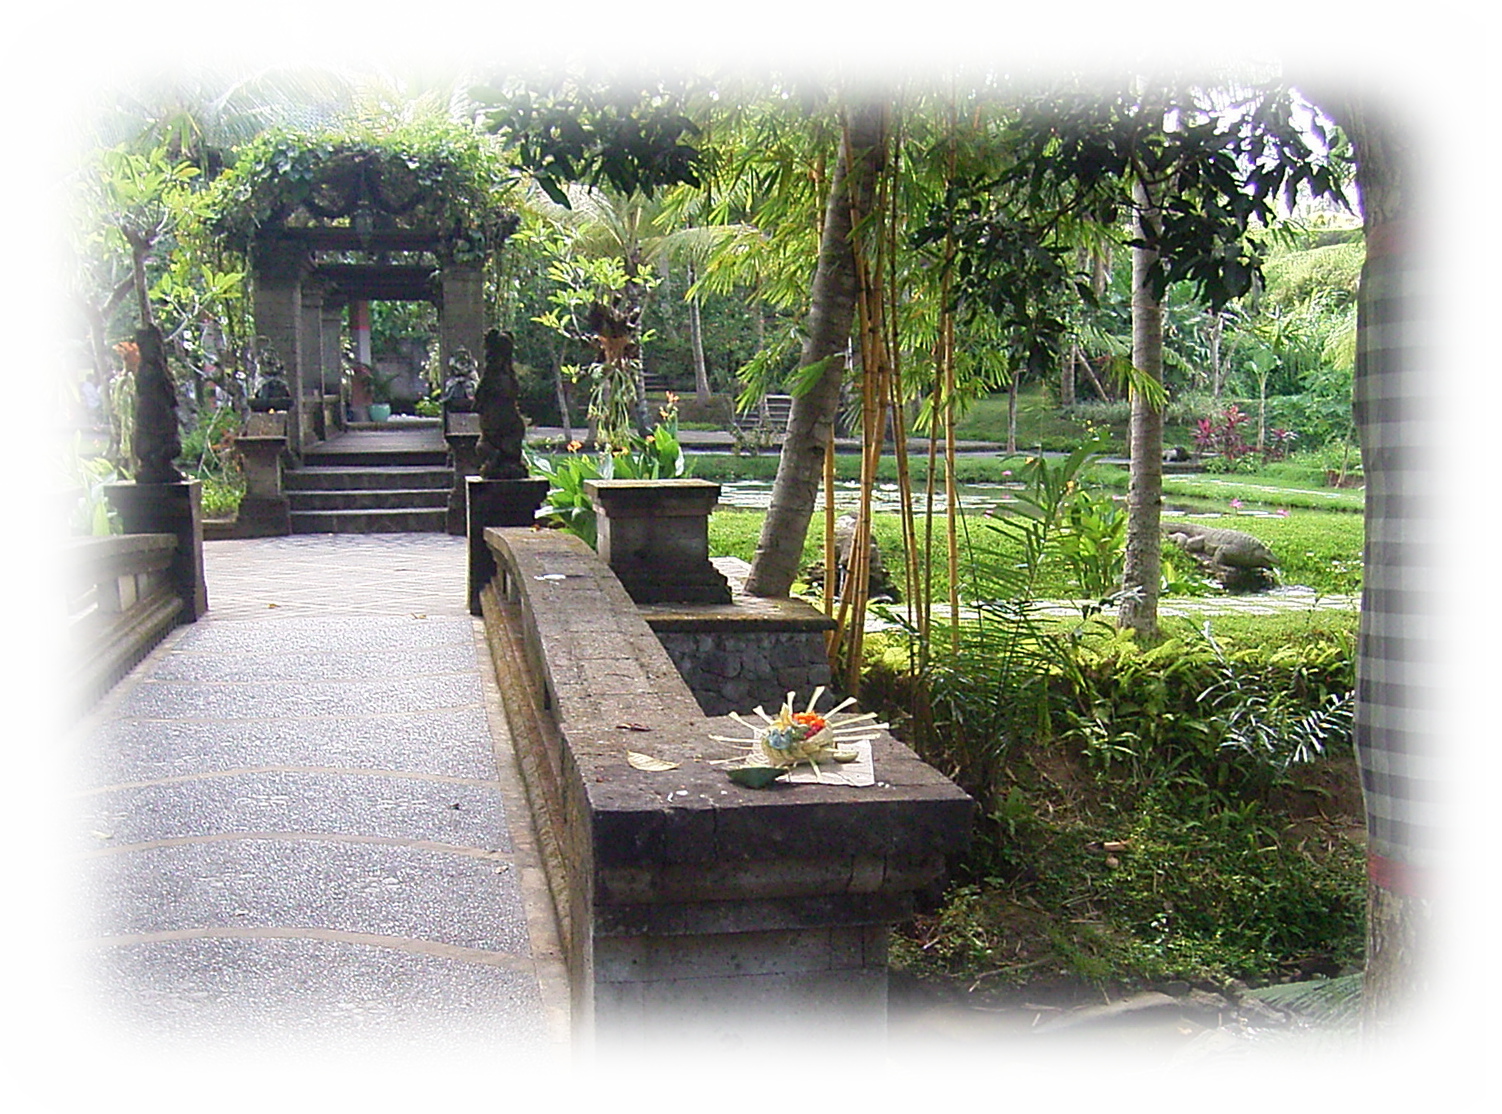 Arma Resort Hotel of Ubud, Bali: Canang is set on the stone bridge of the pond as the Morning offerings. 